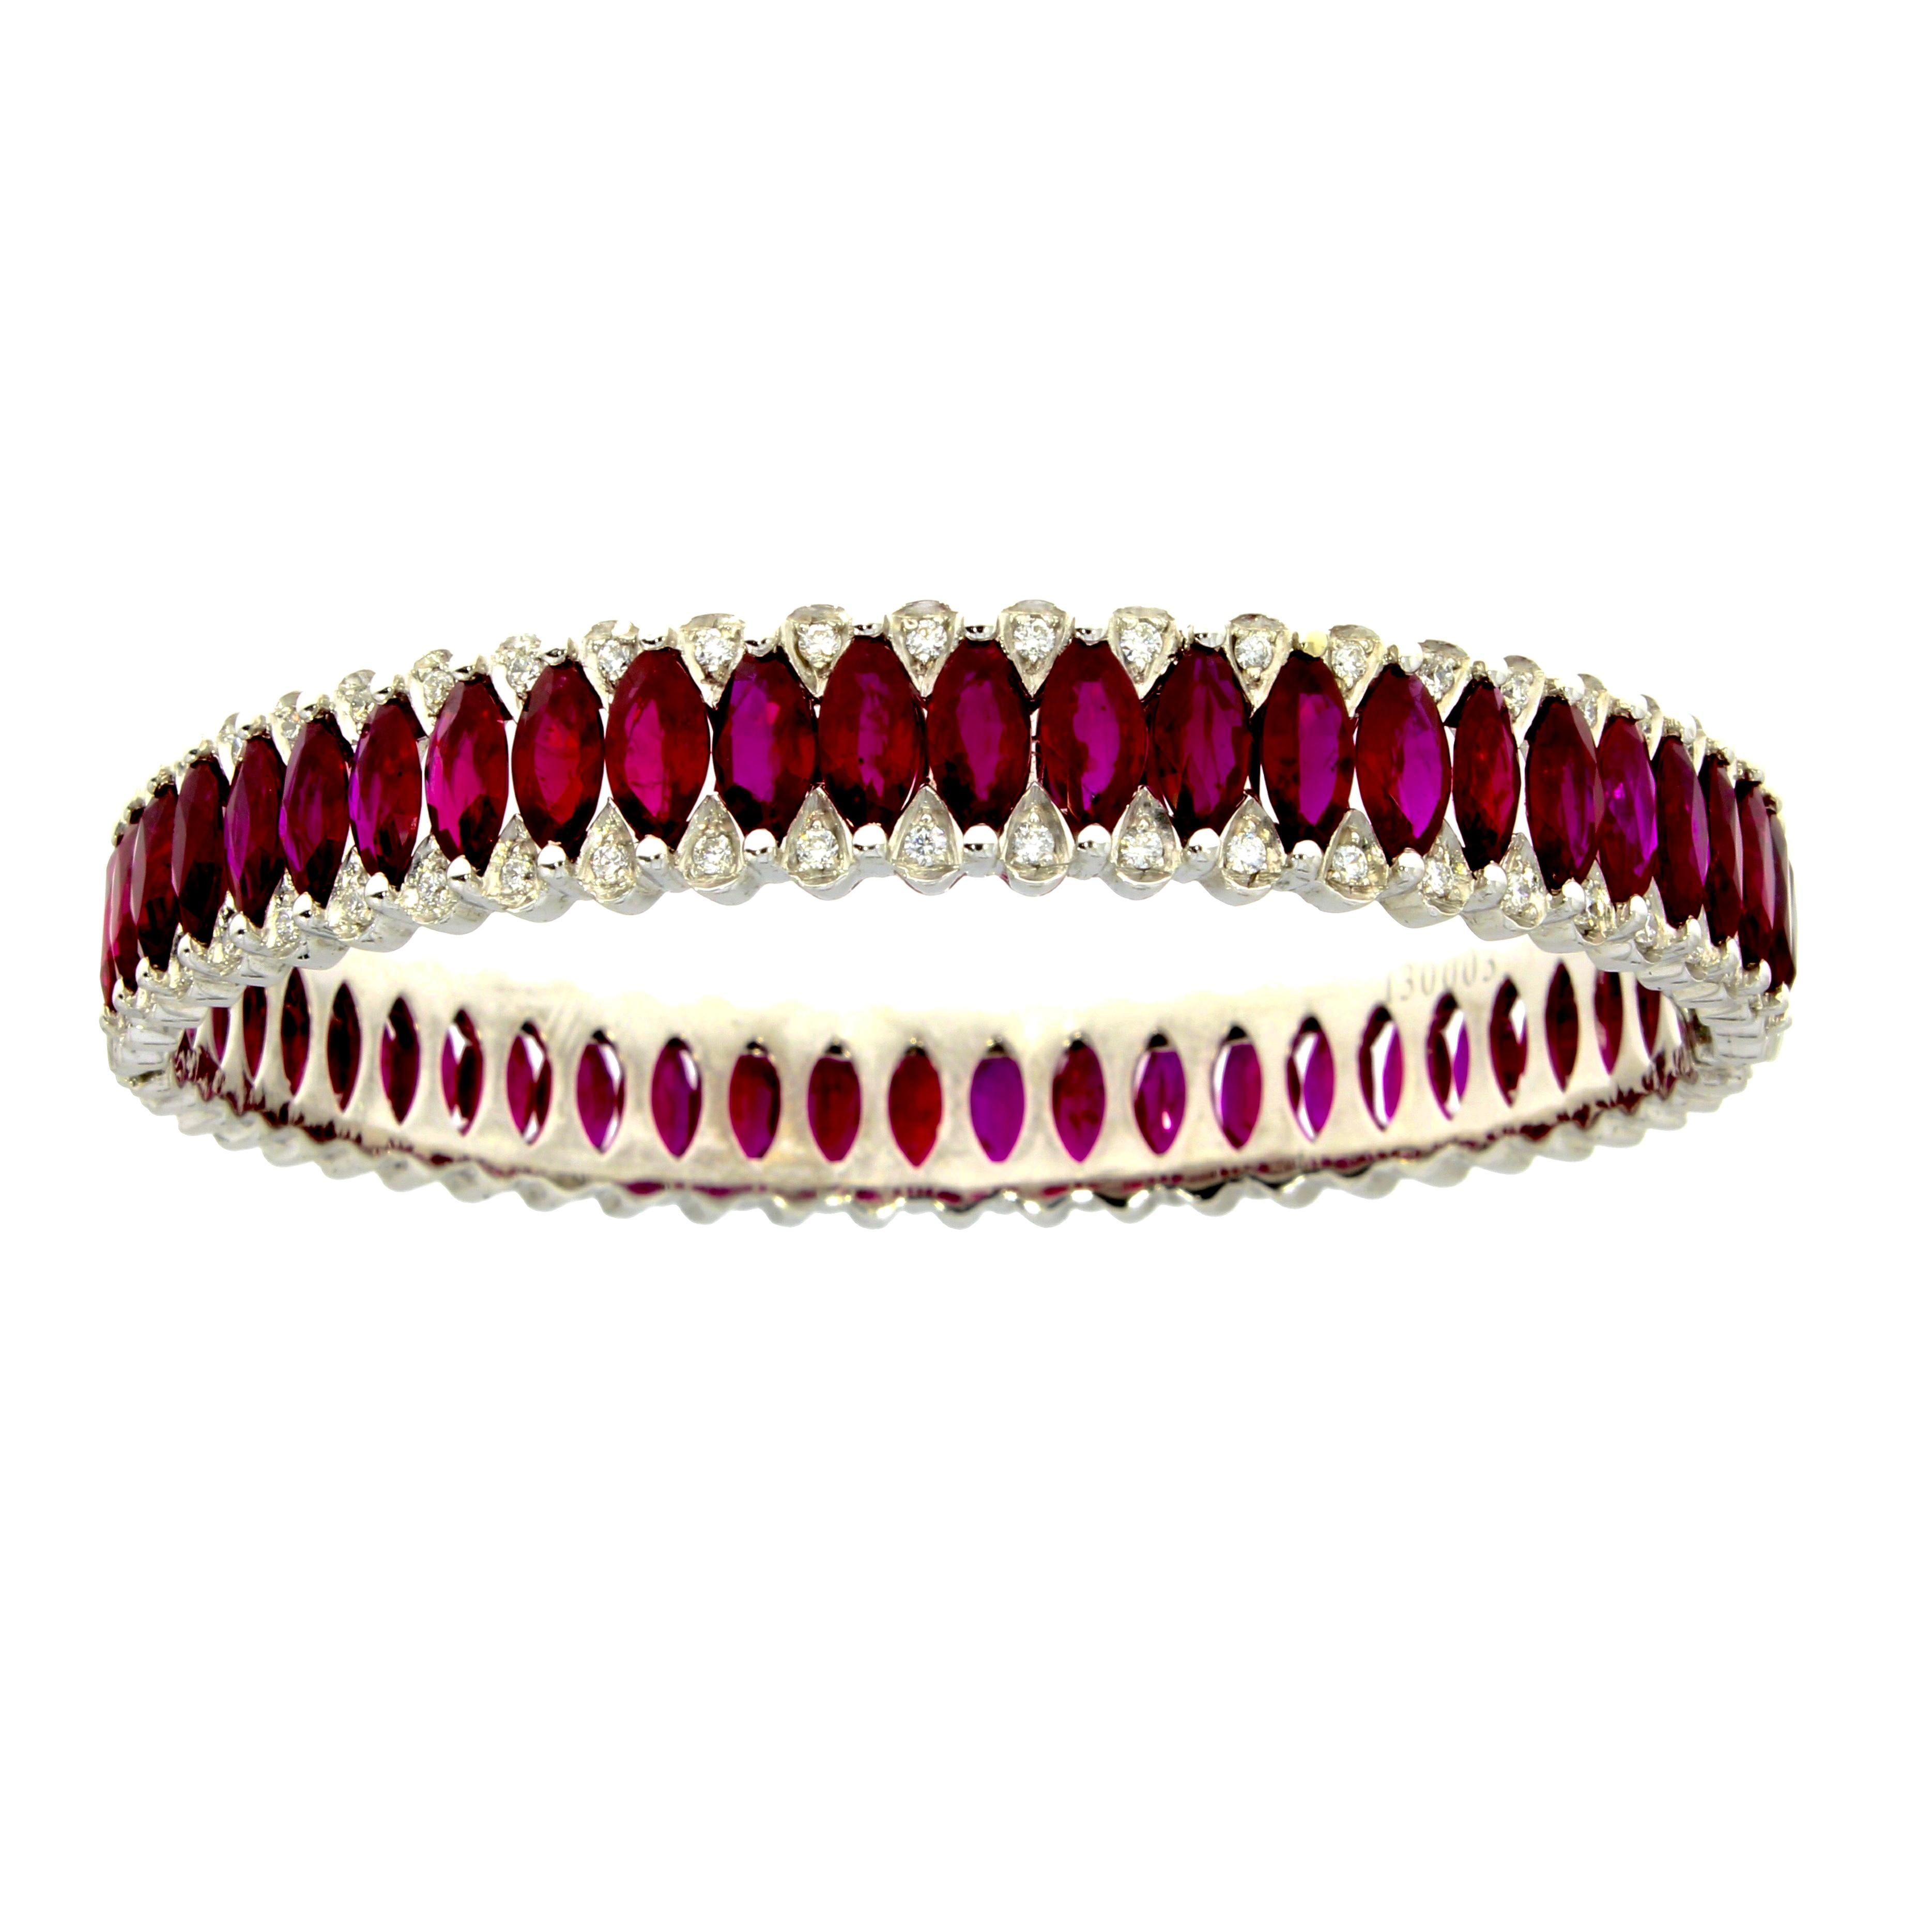 Contemporary 18 Karat White Gold Ruby Amore Eternity Bangle by Niquesa For Sale